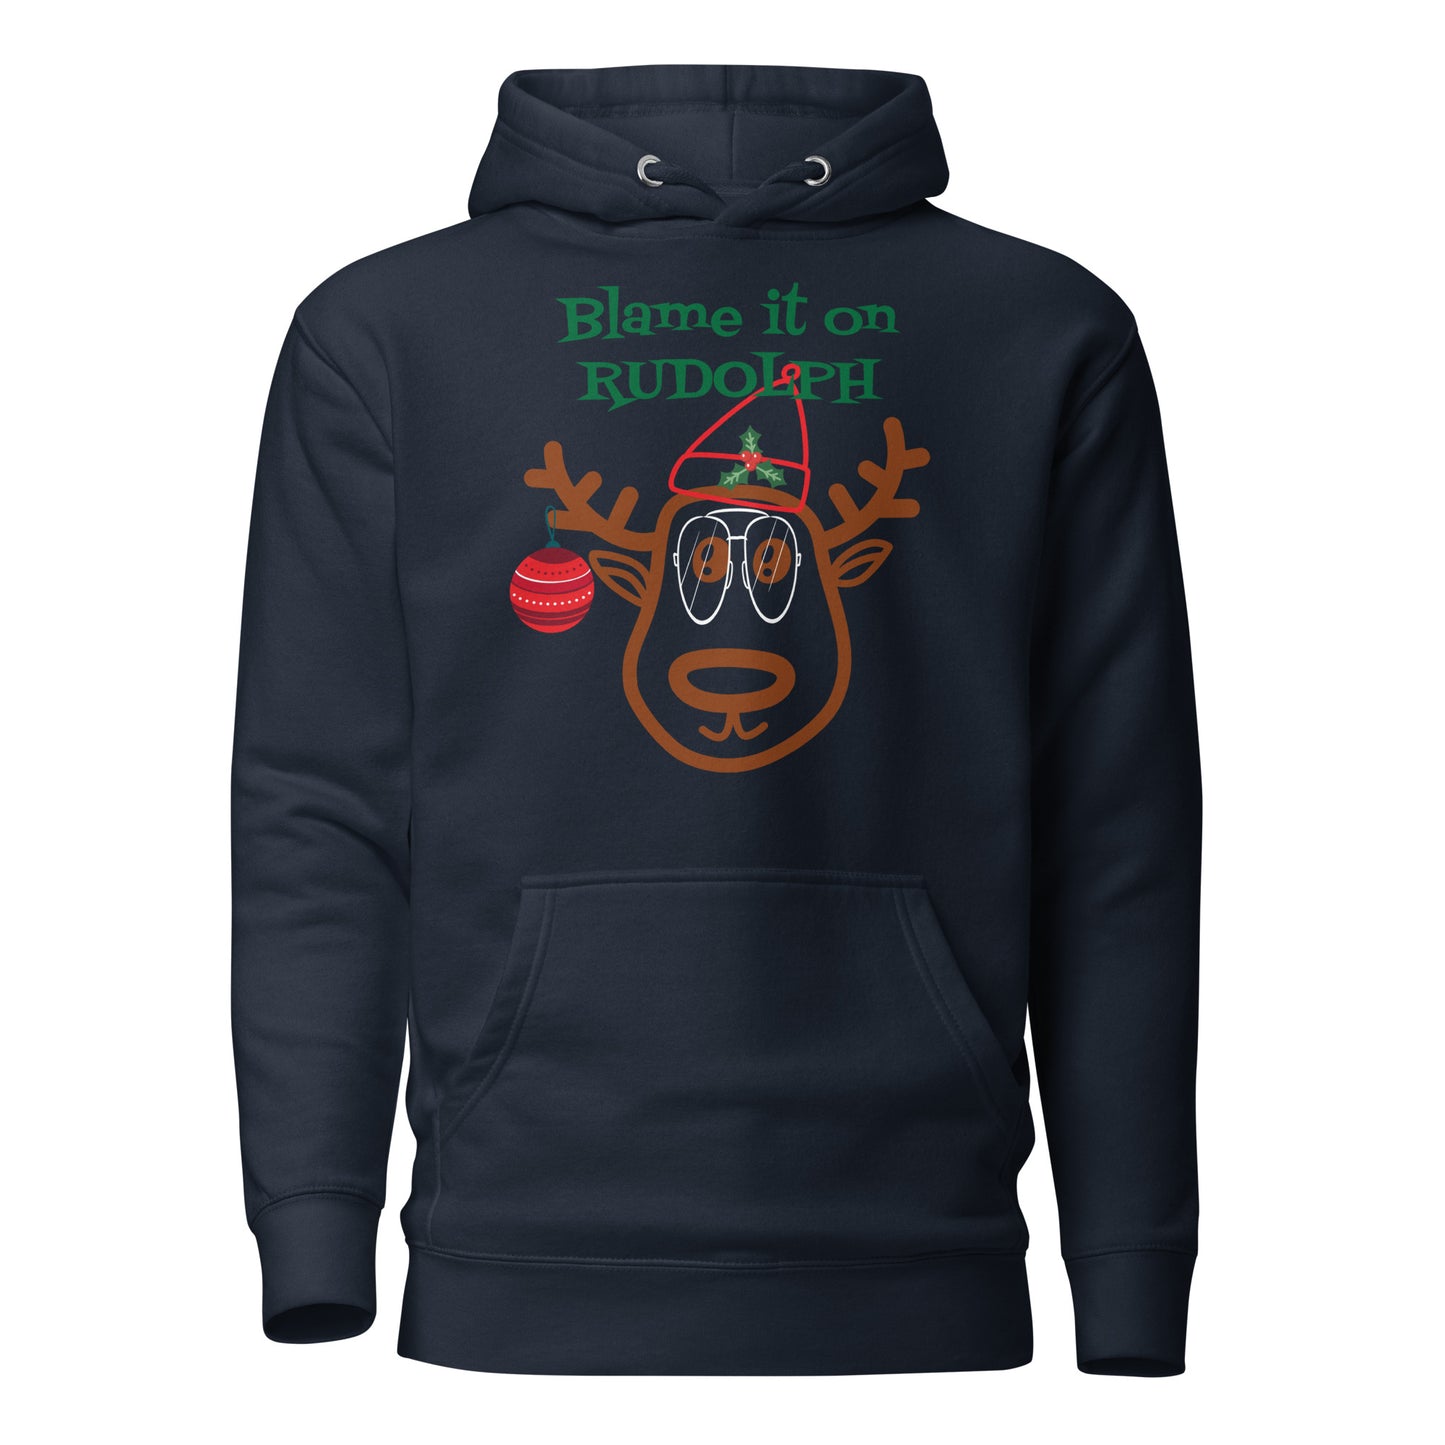 Blame it on RUDOLPH Unisex Hoodie, Christmas Gifts, Christmas Items